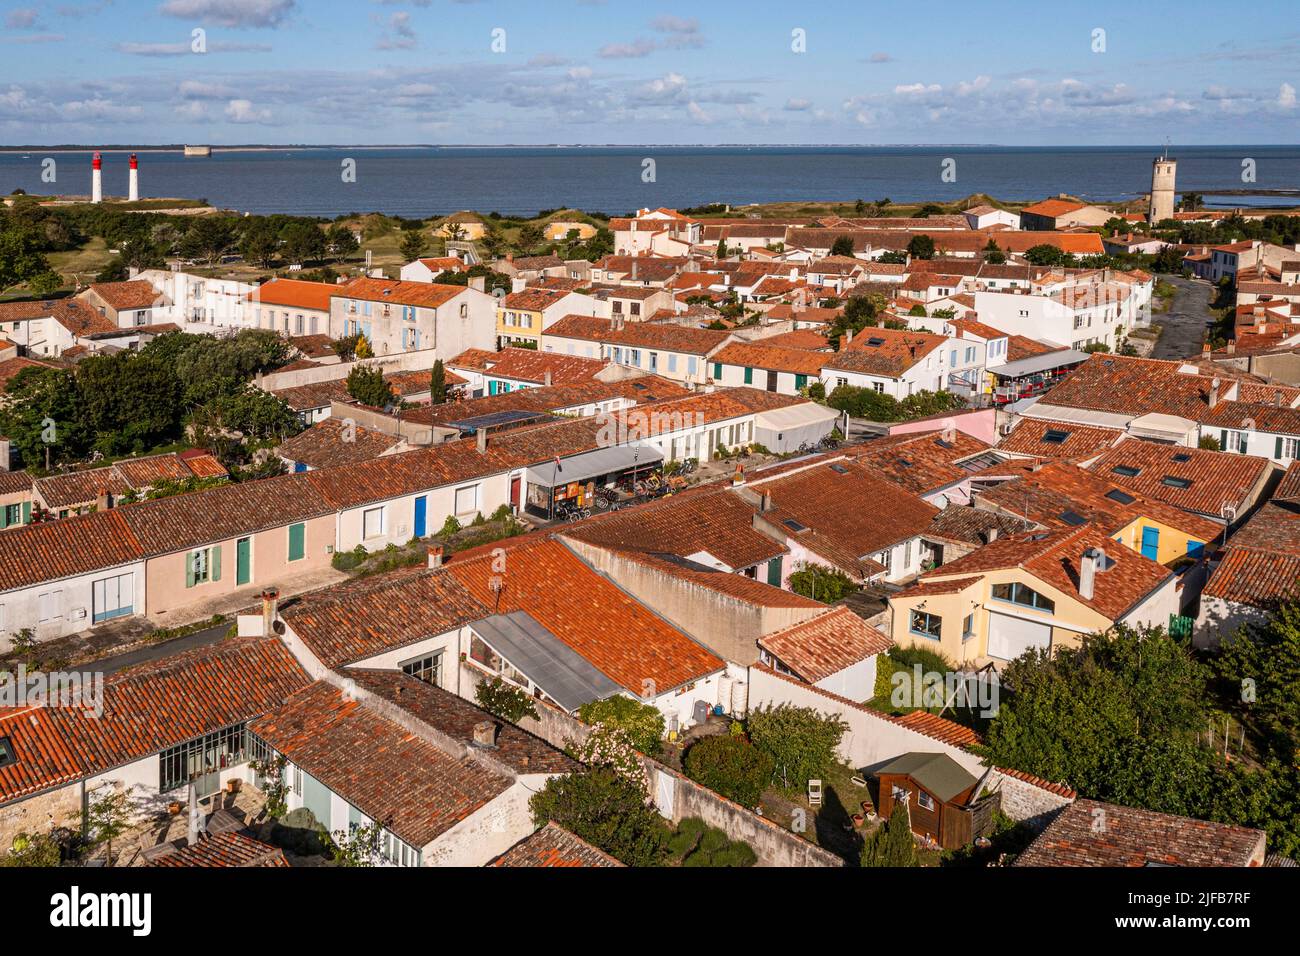 France, Charente-Maritime, Ile d'Aix (Aix Island), the village, old fishermen's houses in Marengo street, Fort Boyard in the background (aerial view) Stock Photo